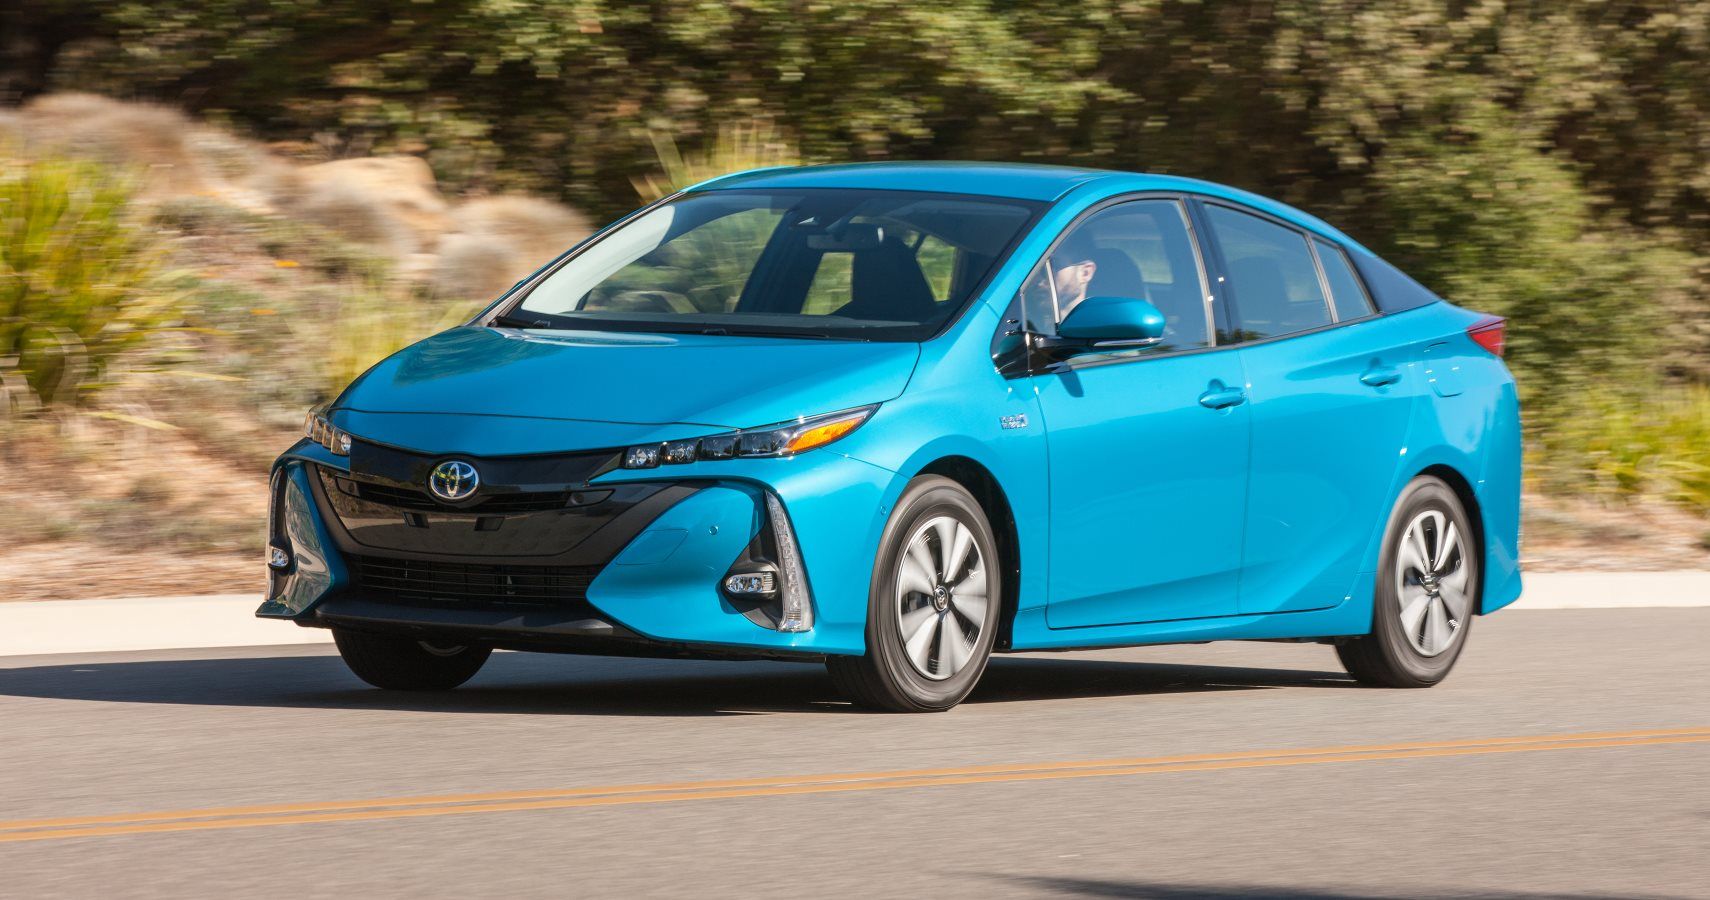 Toyota Opening Up Electric Vehicle Patents In Bid To Widen The Market For EVs